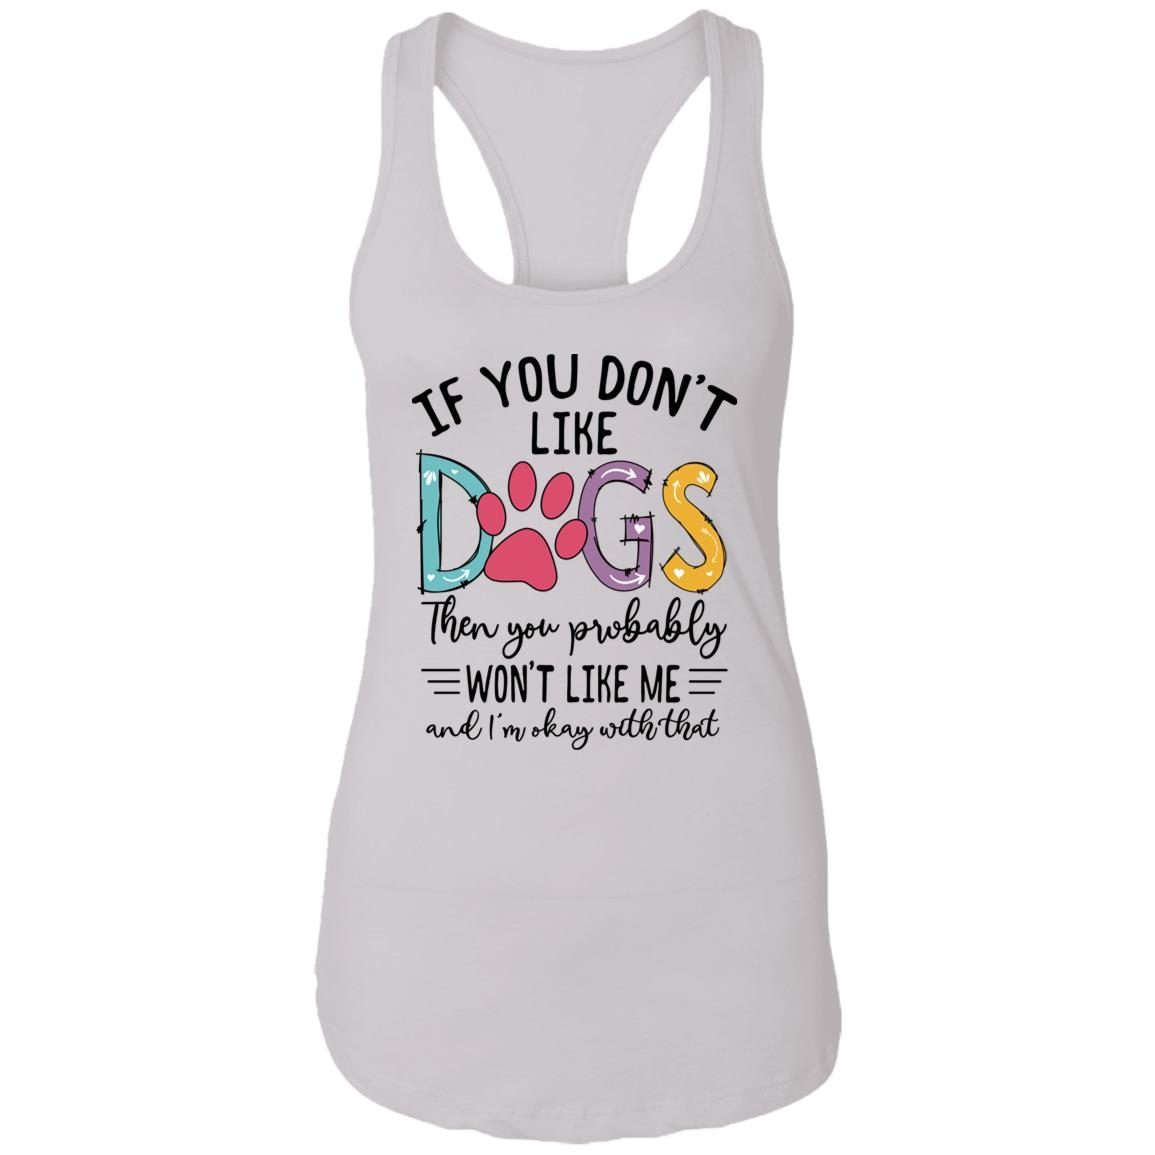 If You Don’t Like Dogs Then You Probably Won’t Like Me shirt 9